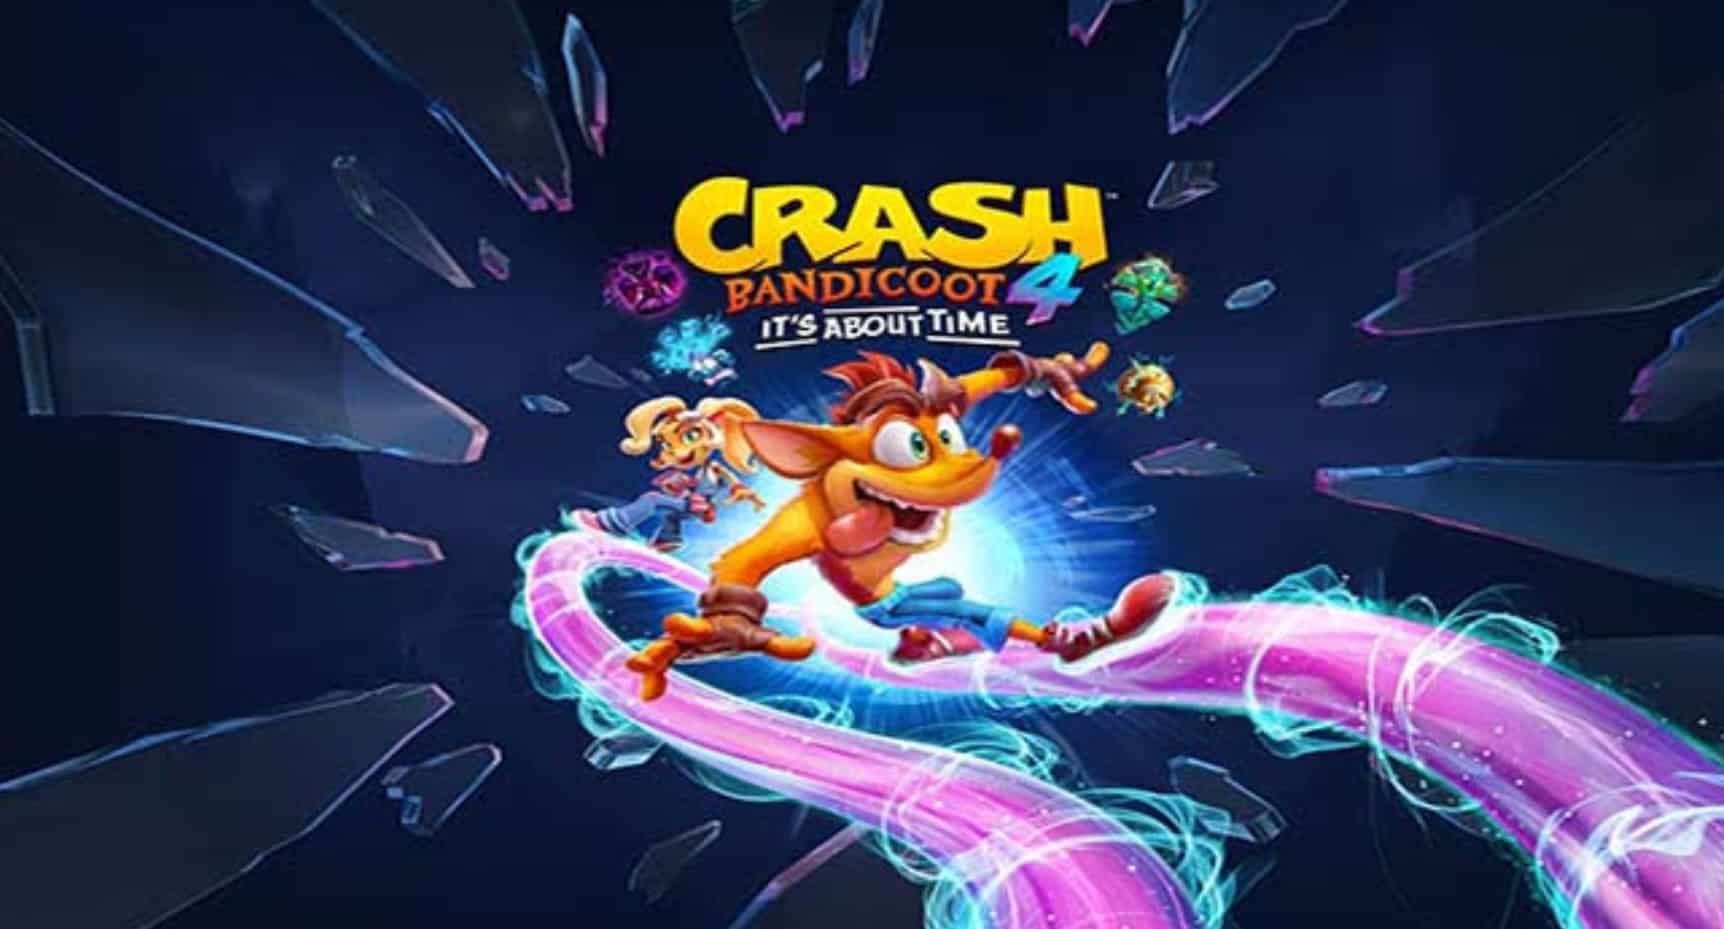 Activision Launches Online-only Version of Crash Bandicoot 4 for PC, But Gets Cracked in Just One Day